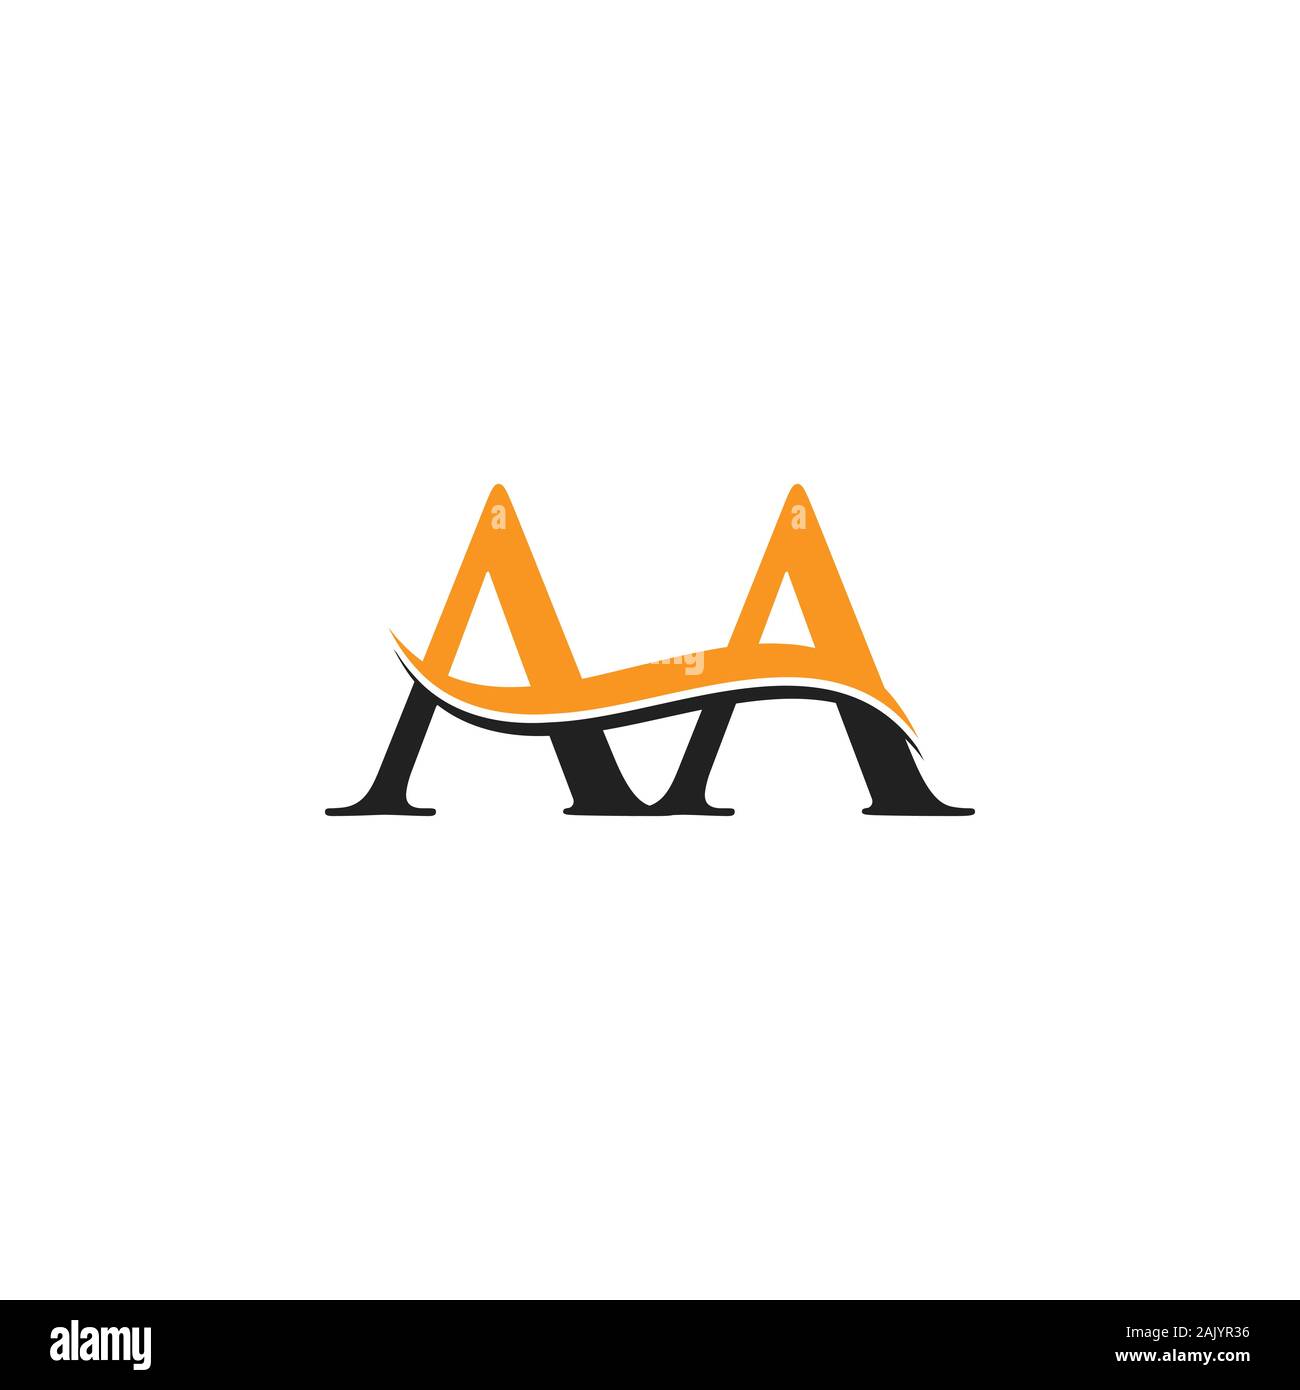 Aa Logo Stock Photos and Images - 123RF